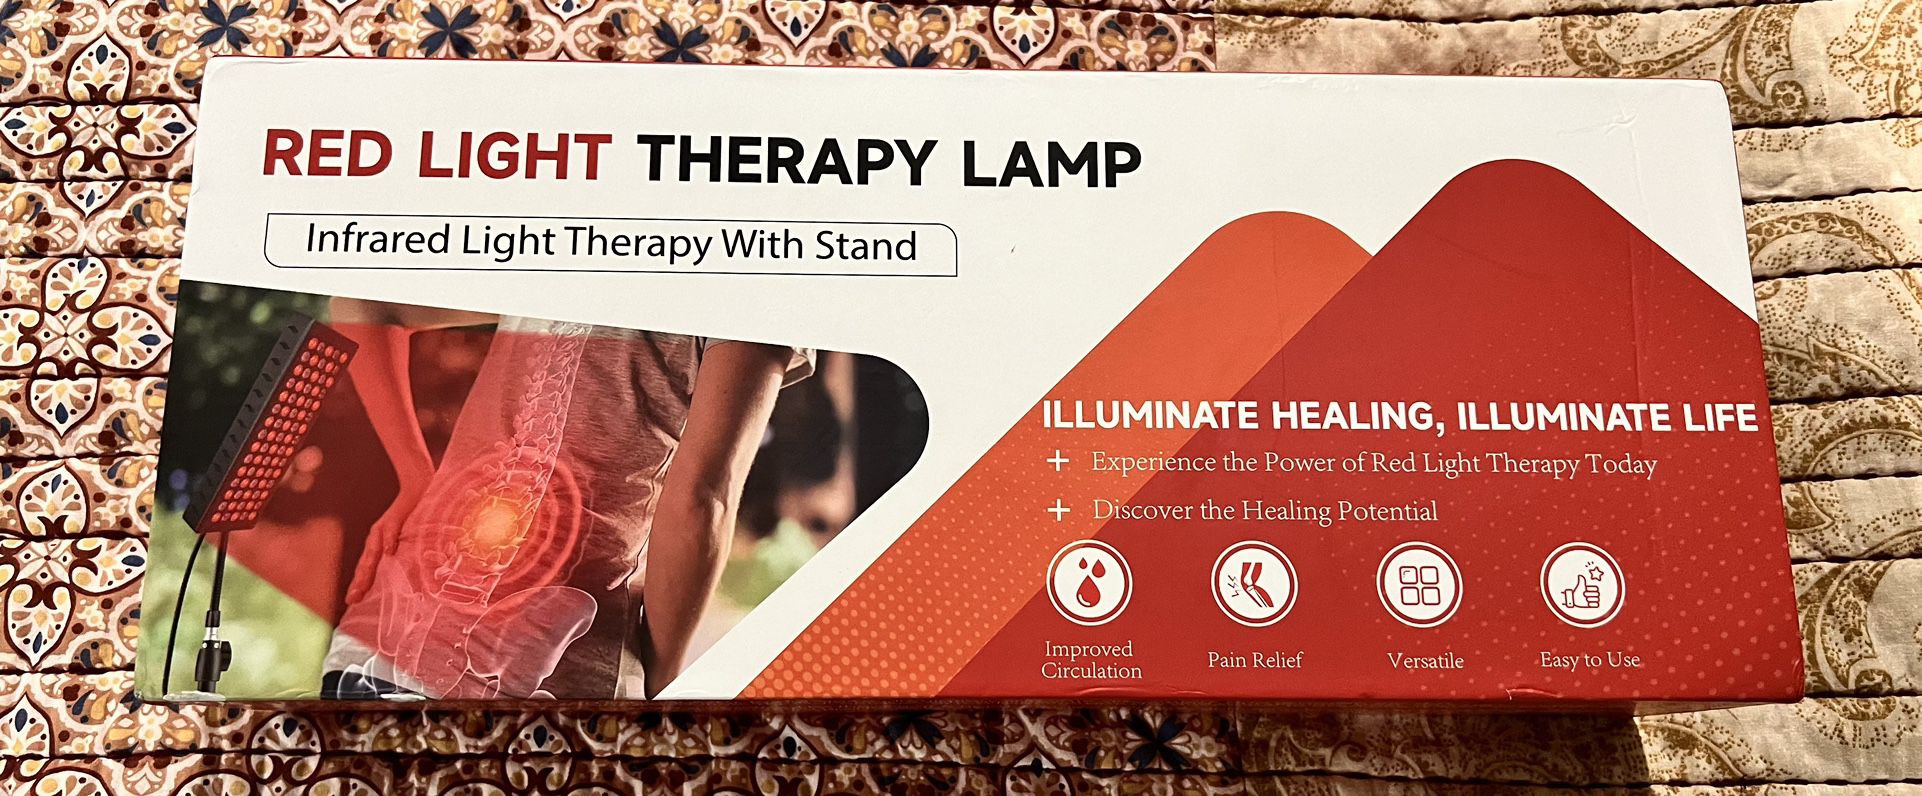 $45-red Light Therapy Lamp With Stand